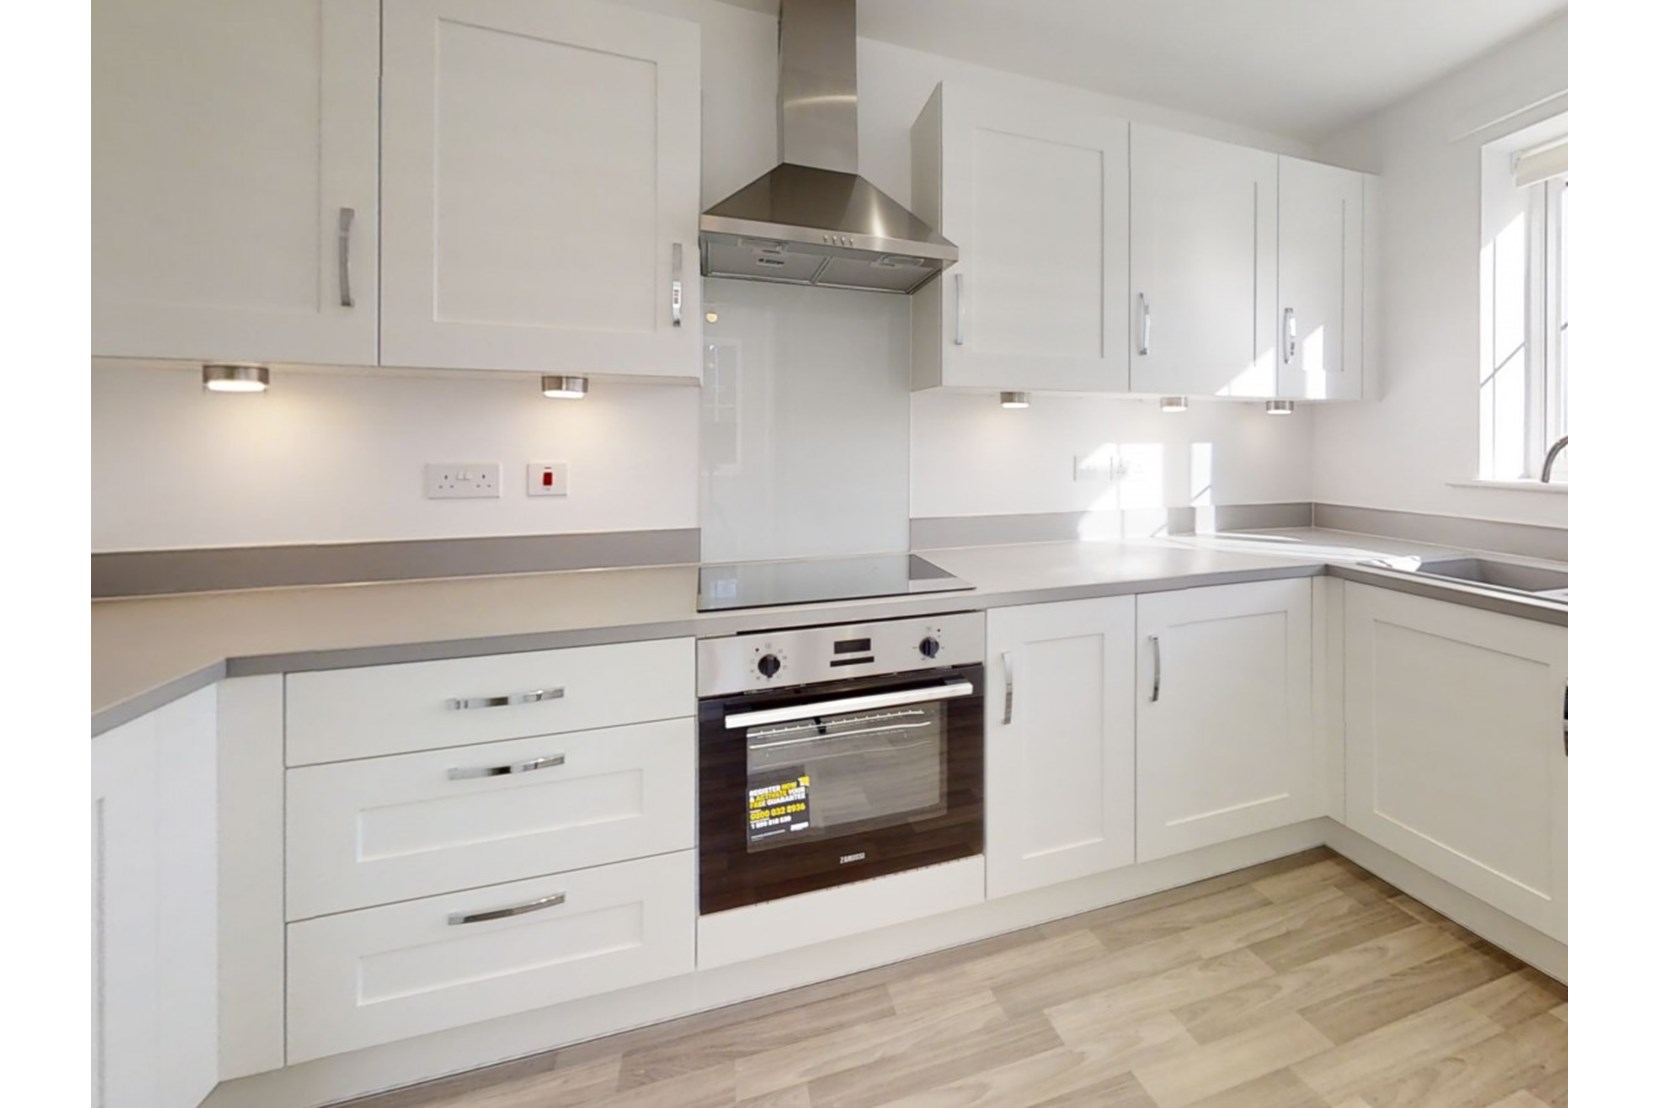 House-Allsop-The-Pioneers-Houlton-Rugby-interior-kitchen